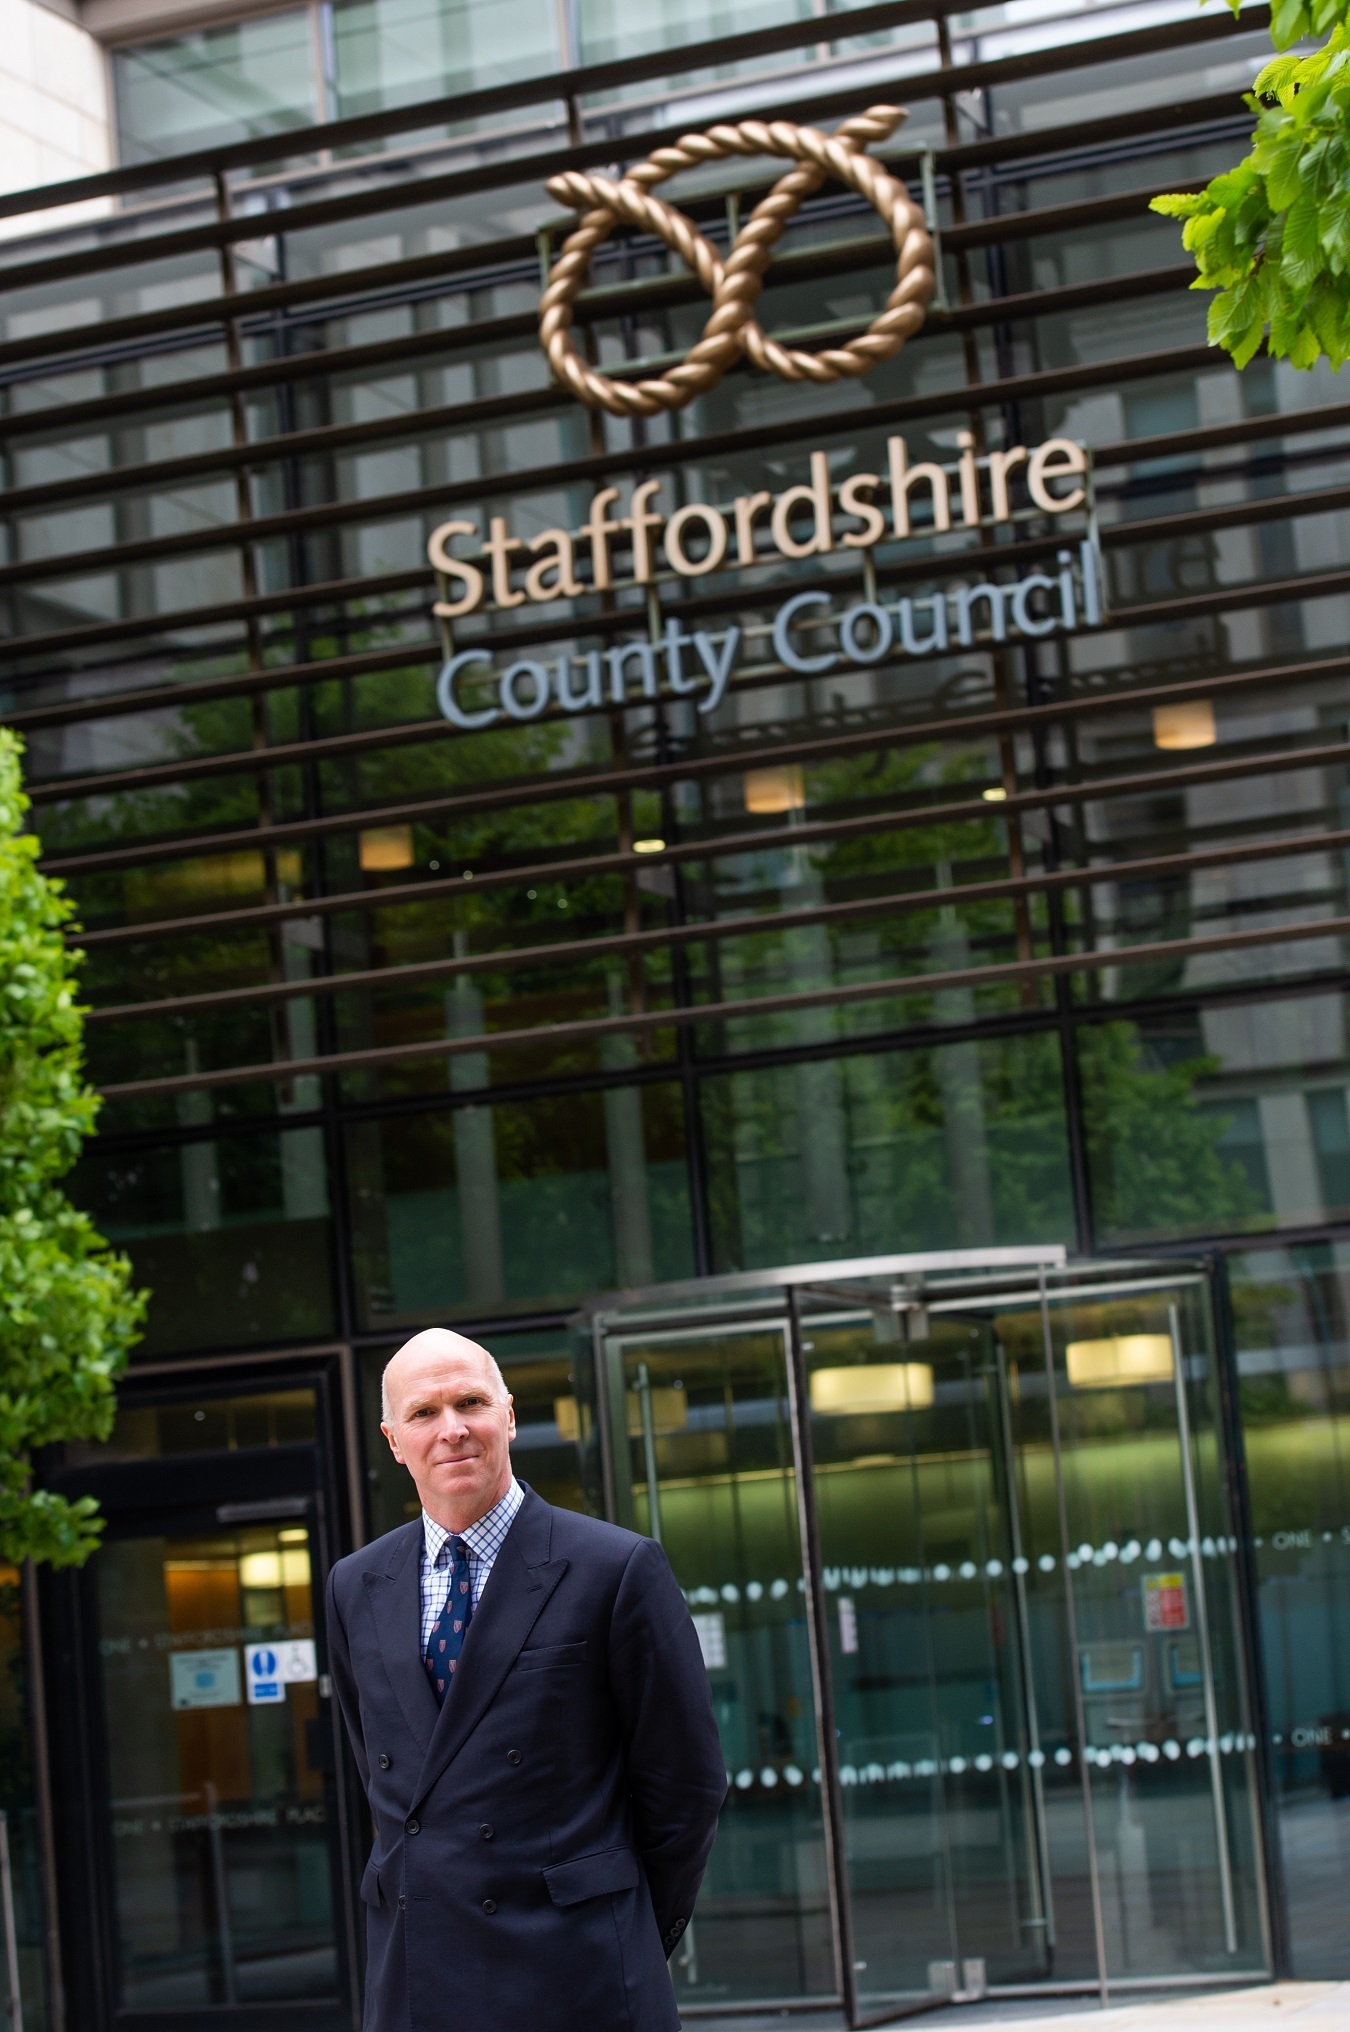 John Henderson, former chief executive of Staffordshire County Council. Pic Staffordshire County Council, free for use by partners of BBC news wire service